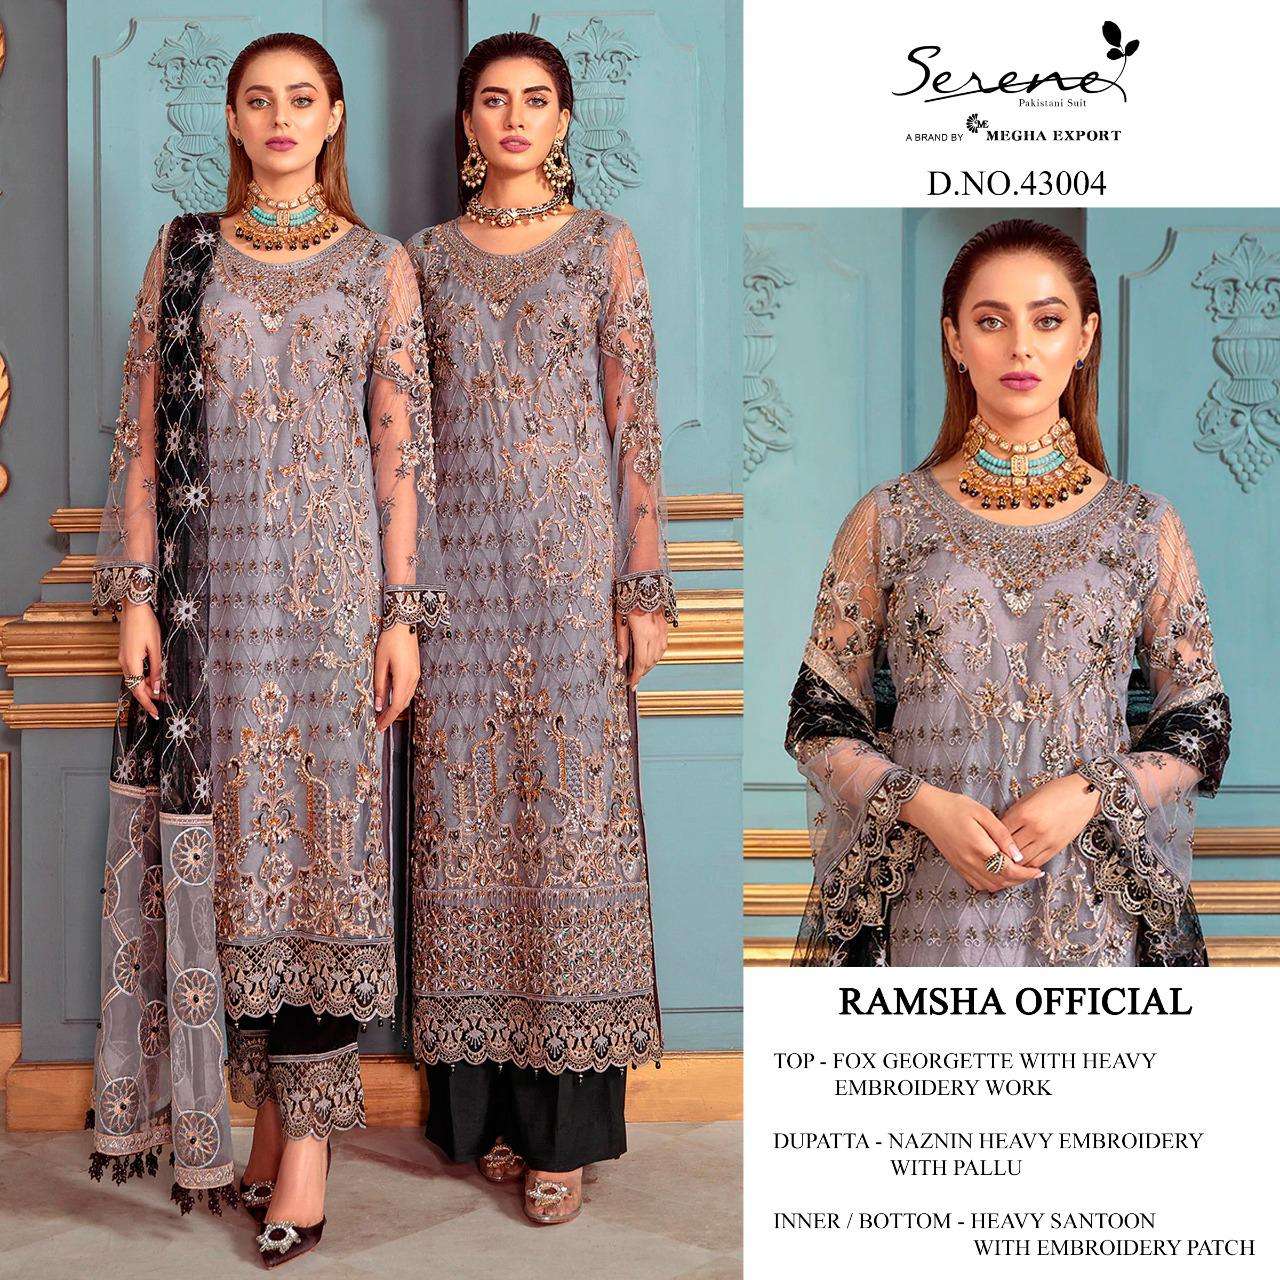 megha exports serene ramsha offical series 43001 - 43005 georgette pakistani collection online shopping surat 